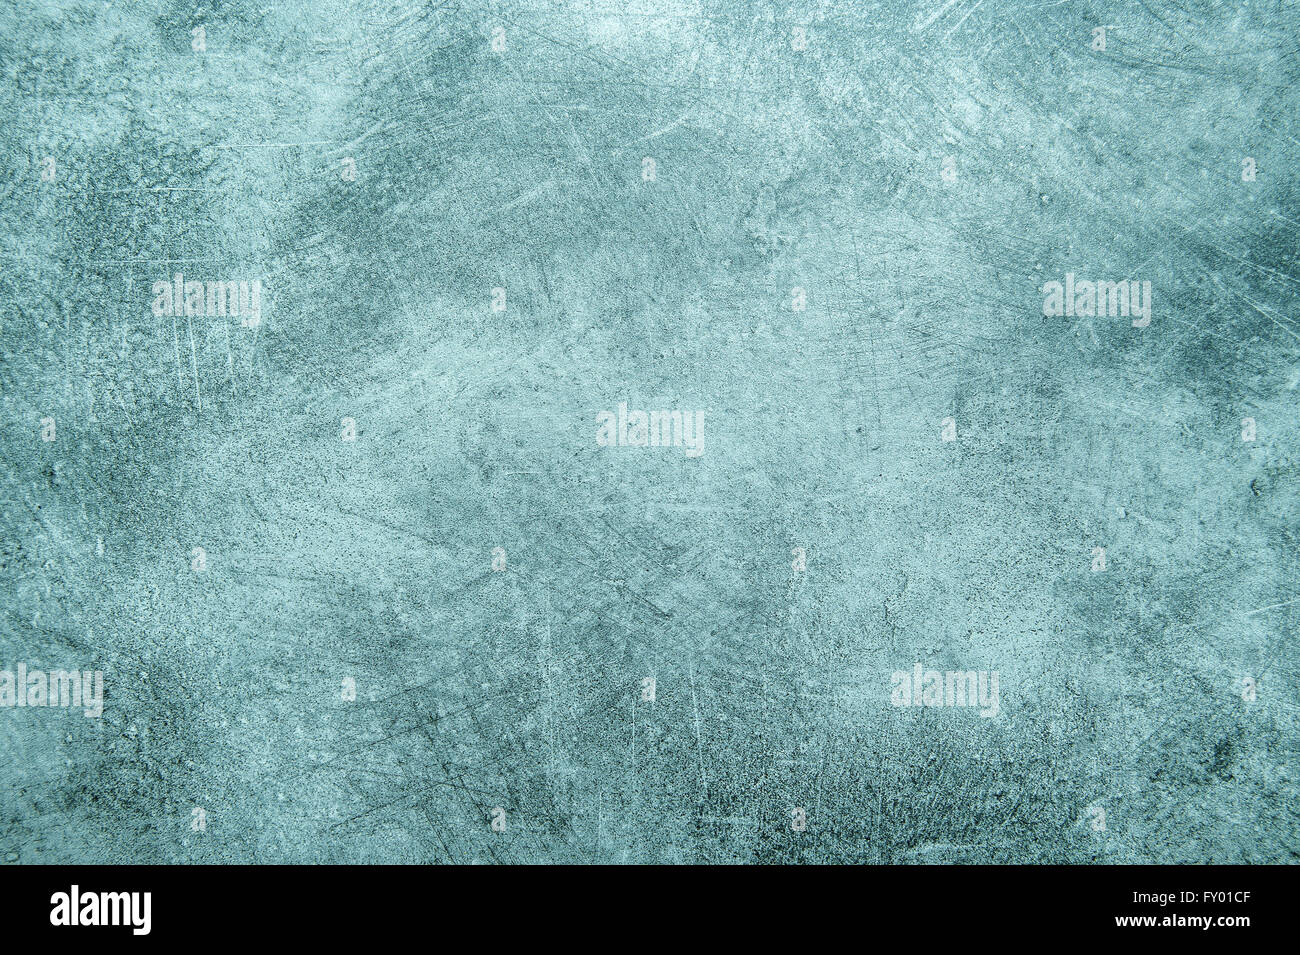 Rustic scratched blue stone texture. Vintage style toned background Stock Photo